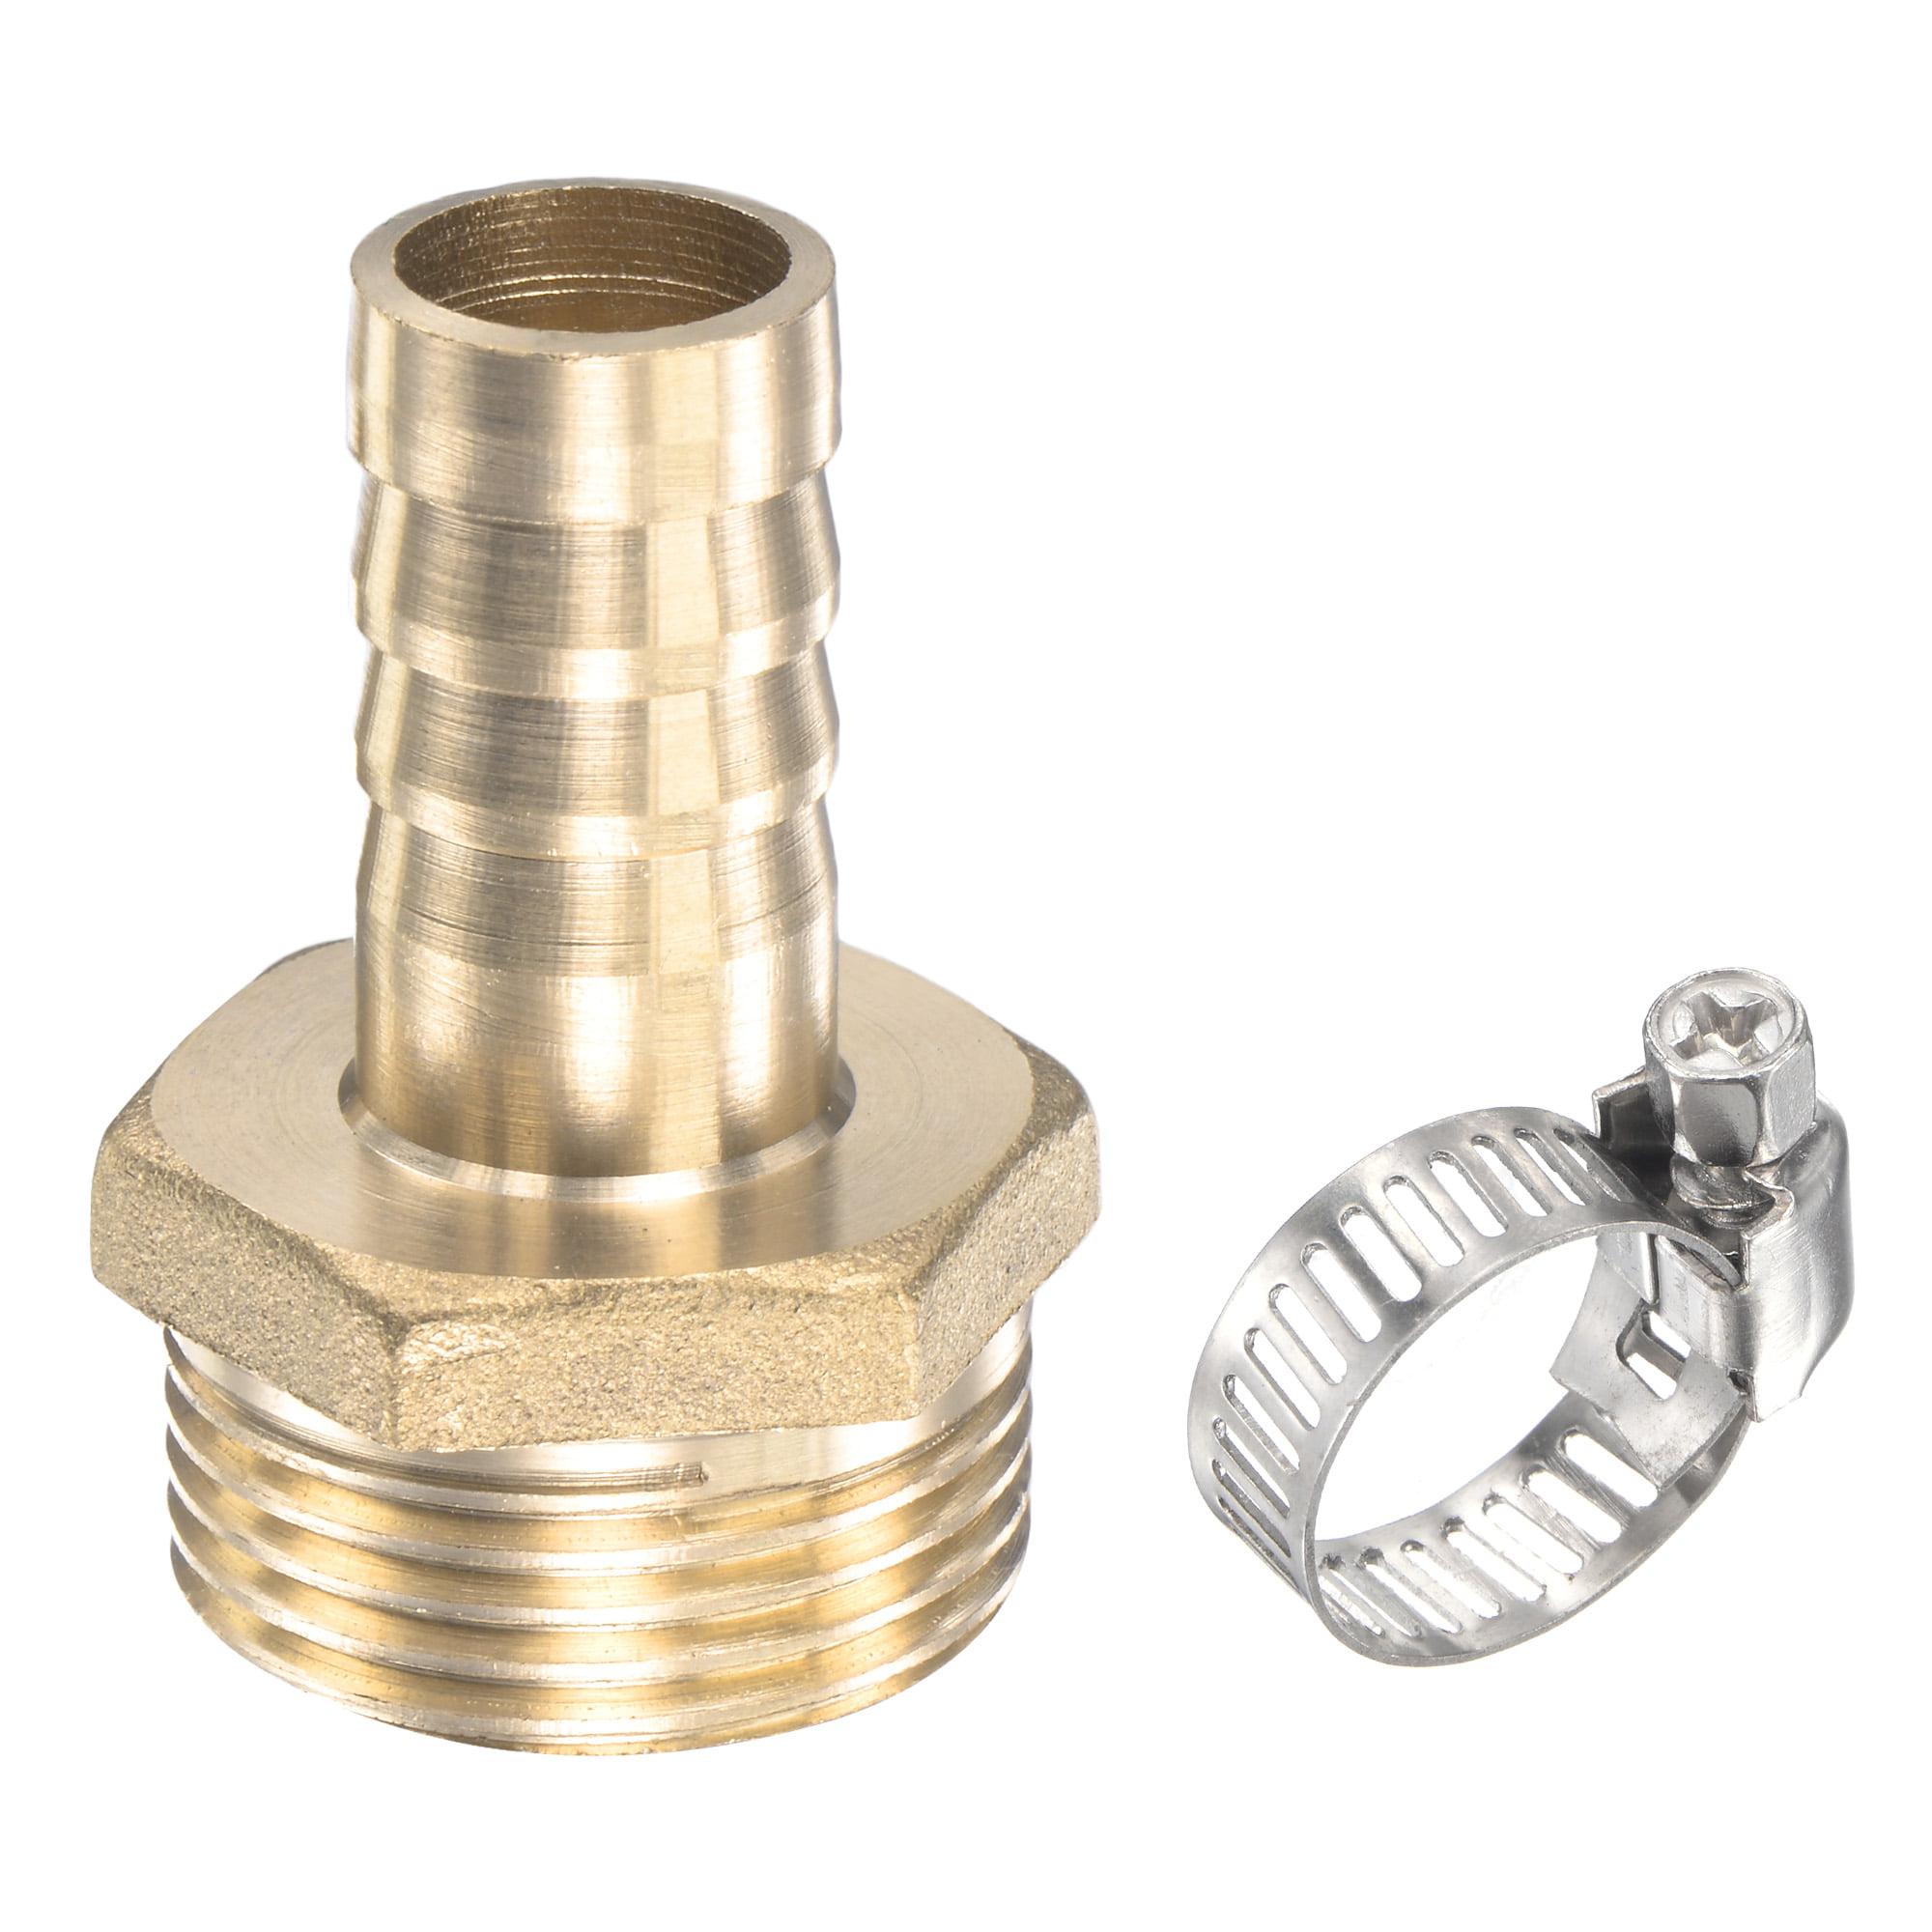 Size: 19mm OD; Thread Specification: 3/4 16mm 19mm Hose Barb x 3/4 BSP Male Thread Elbow Brass Barbed Pipe Fitting Coupler Connector Adapter For Fuel Gas Water